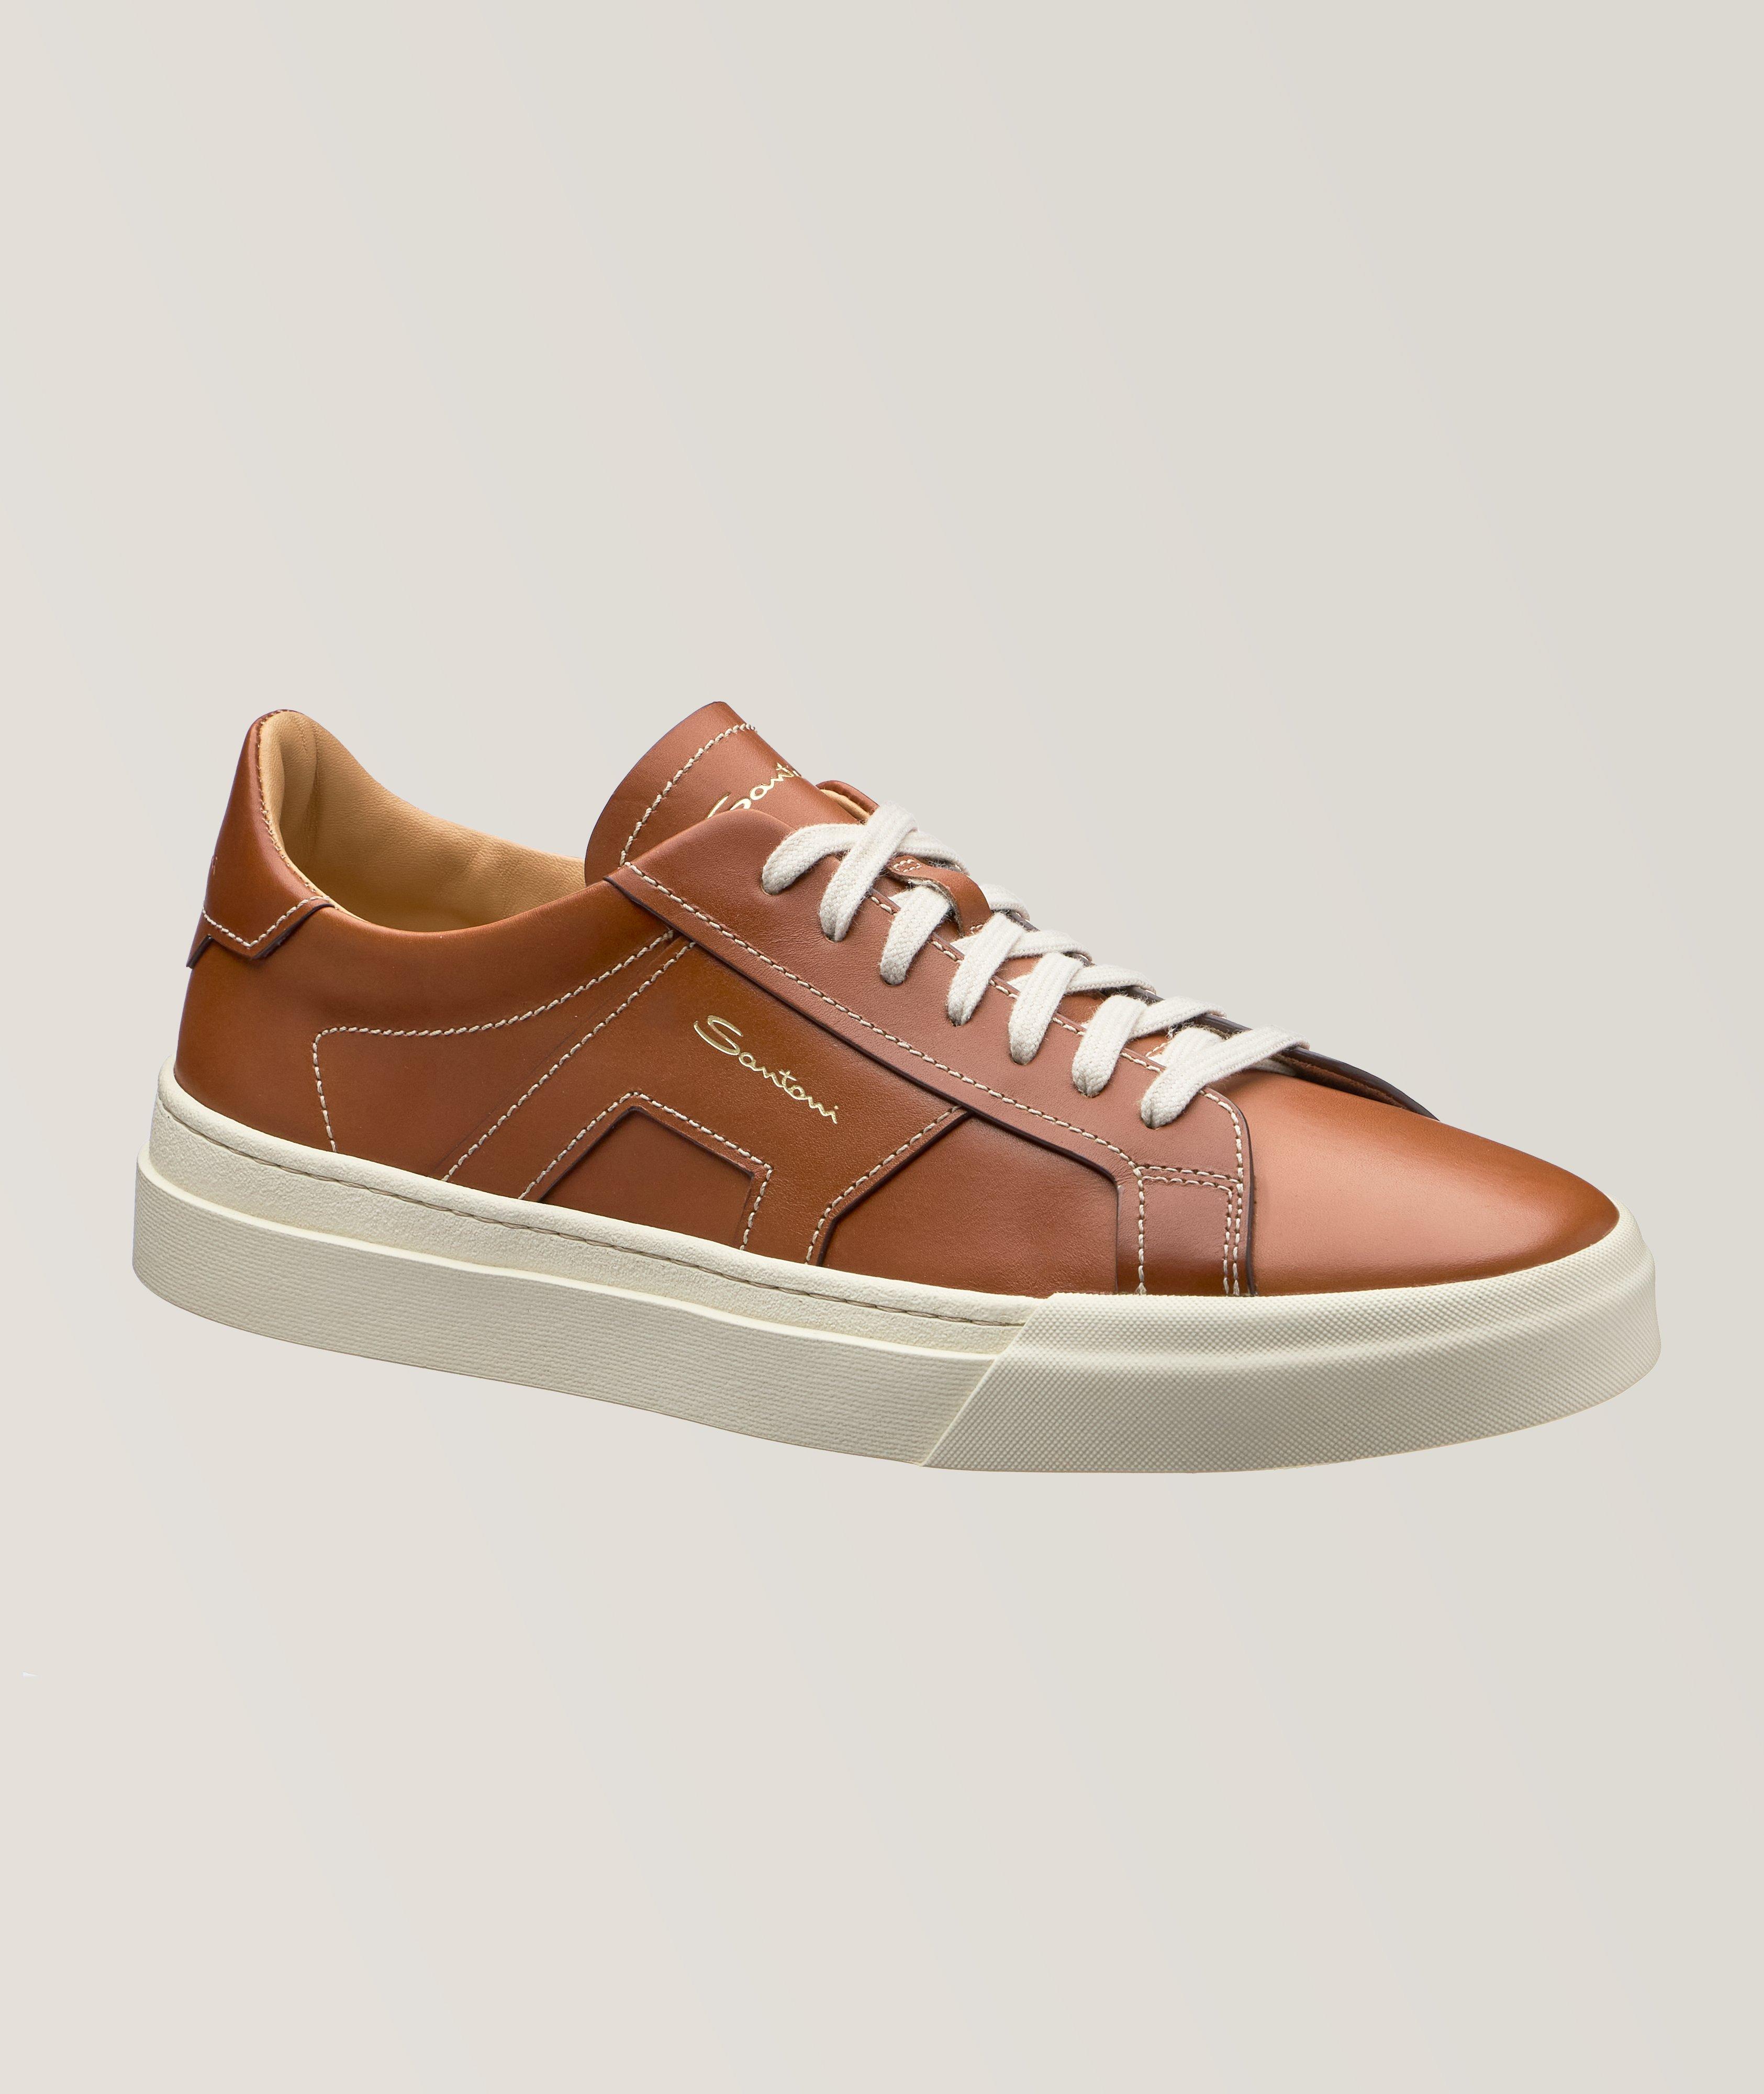 DBS3 Tonal Burnished Leather Sneakers image 0